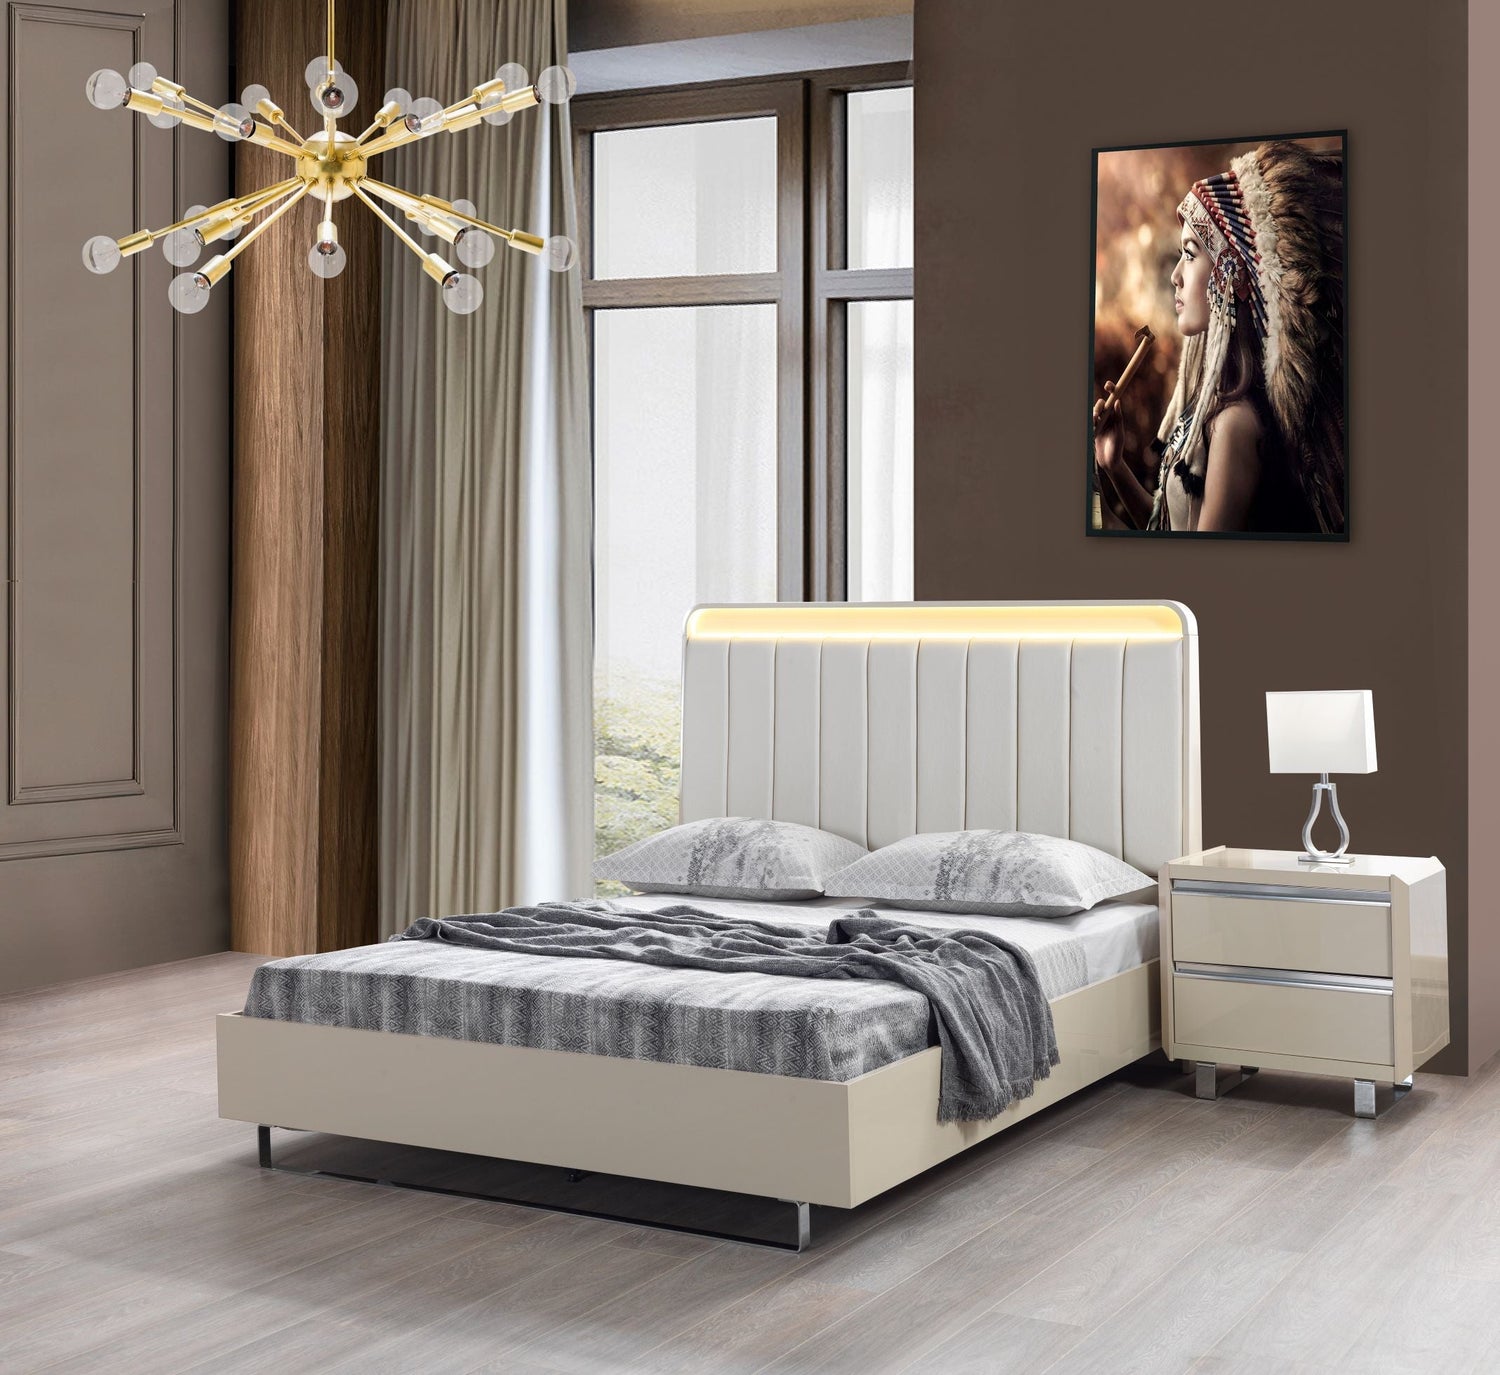 Viola Cream High Gloss Lacquer 4-Piece Queen Bedroom Set - VIOLABEDROOM-4PCQ - Bien Home Furniture &amp; Electronics